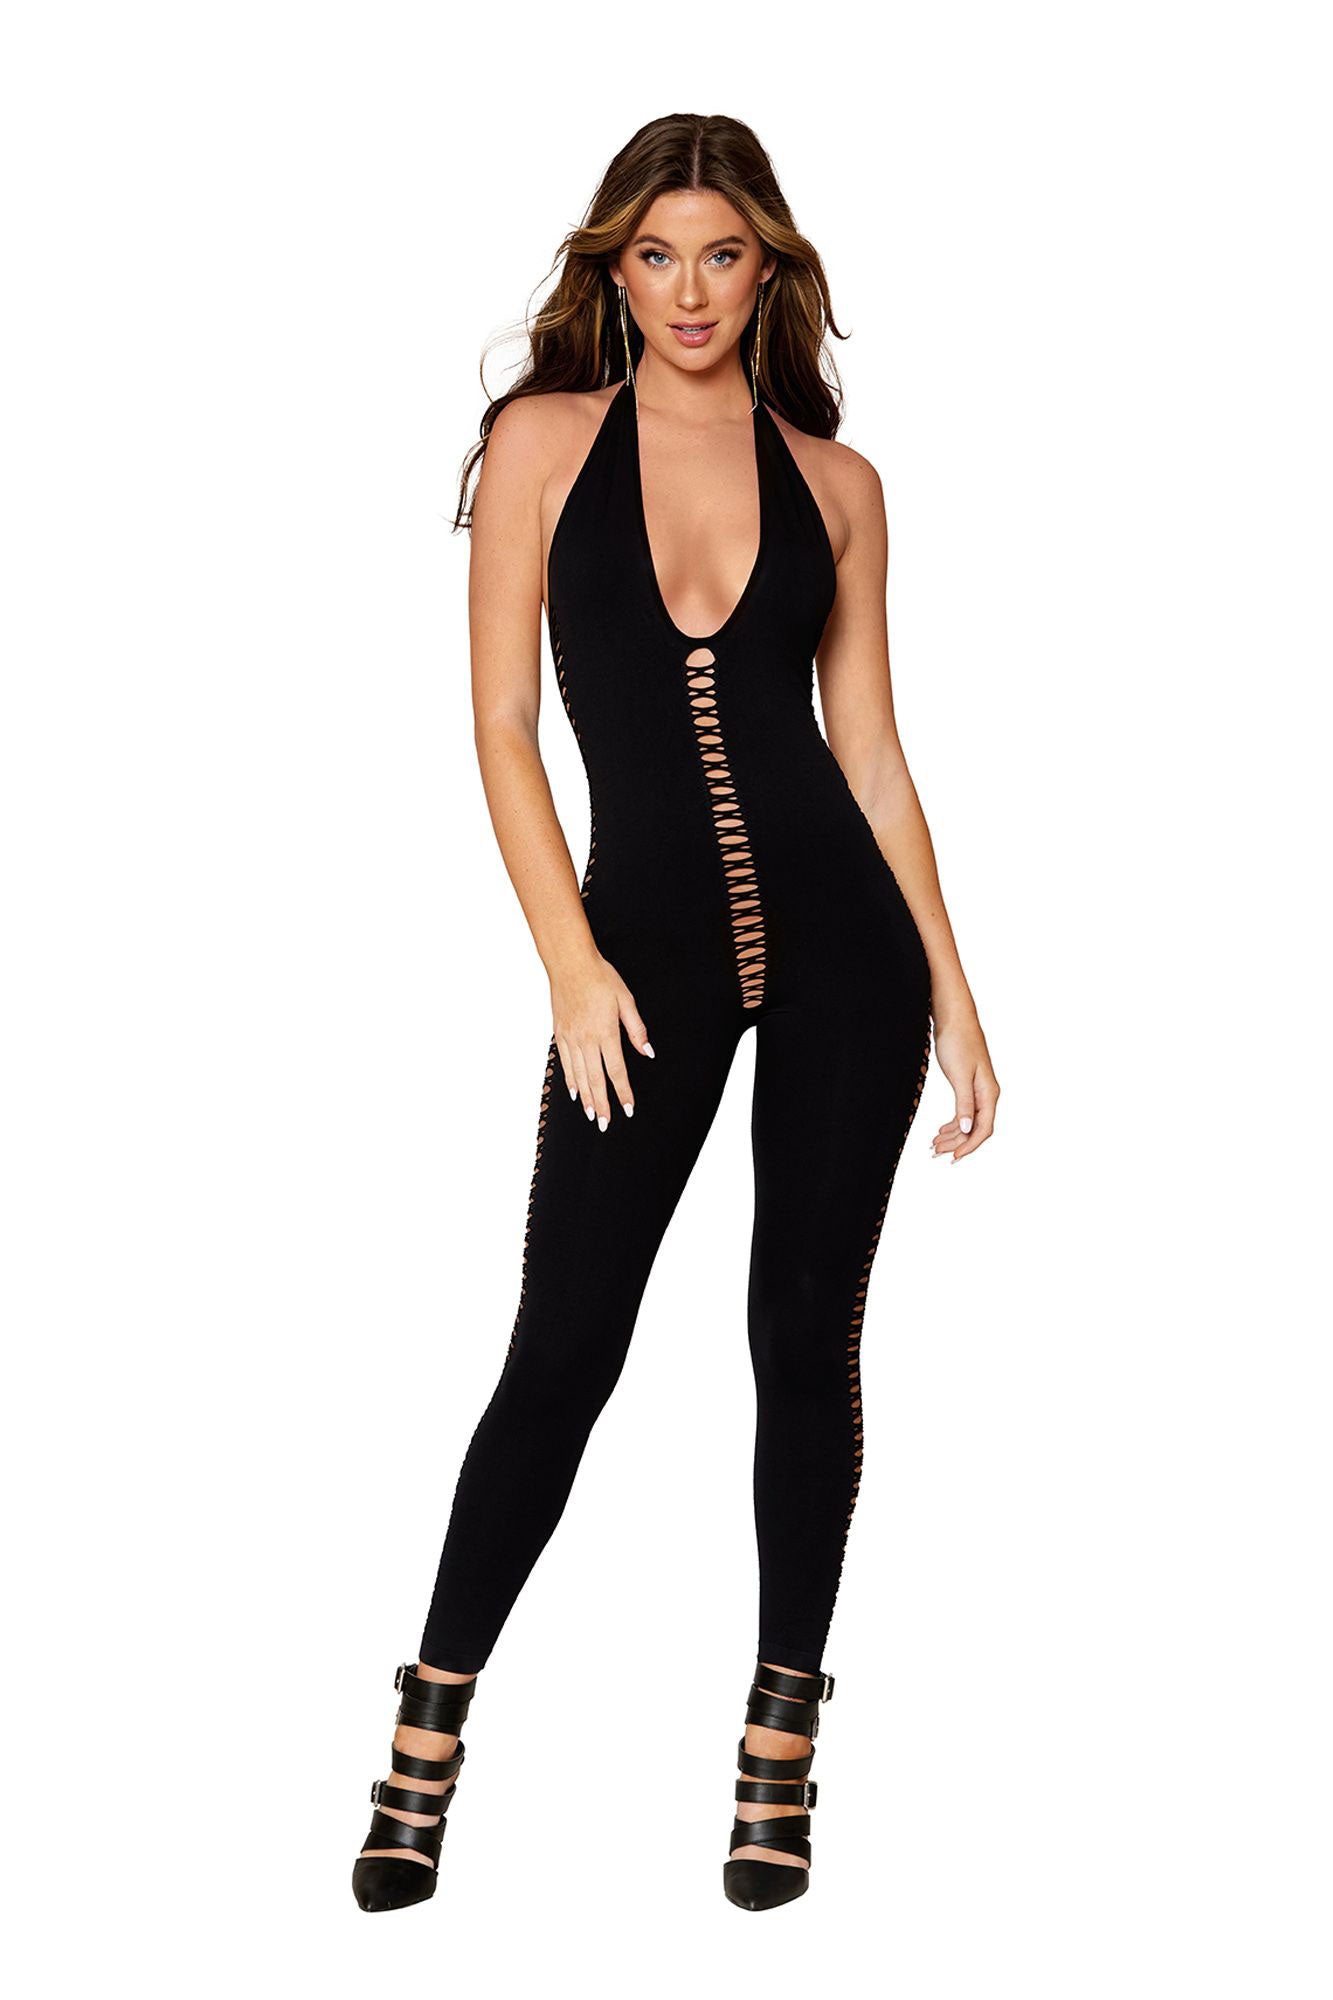 Catsuit Bodystocking - One Size - Black